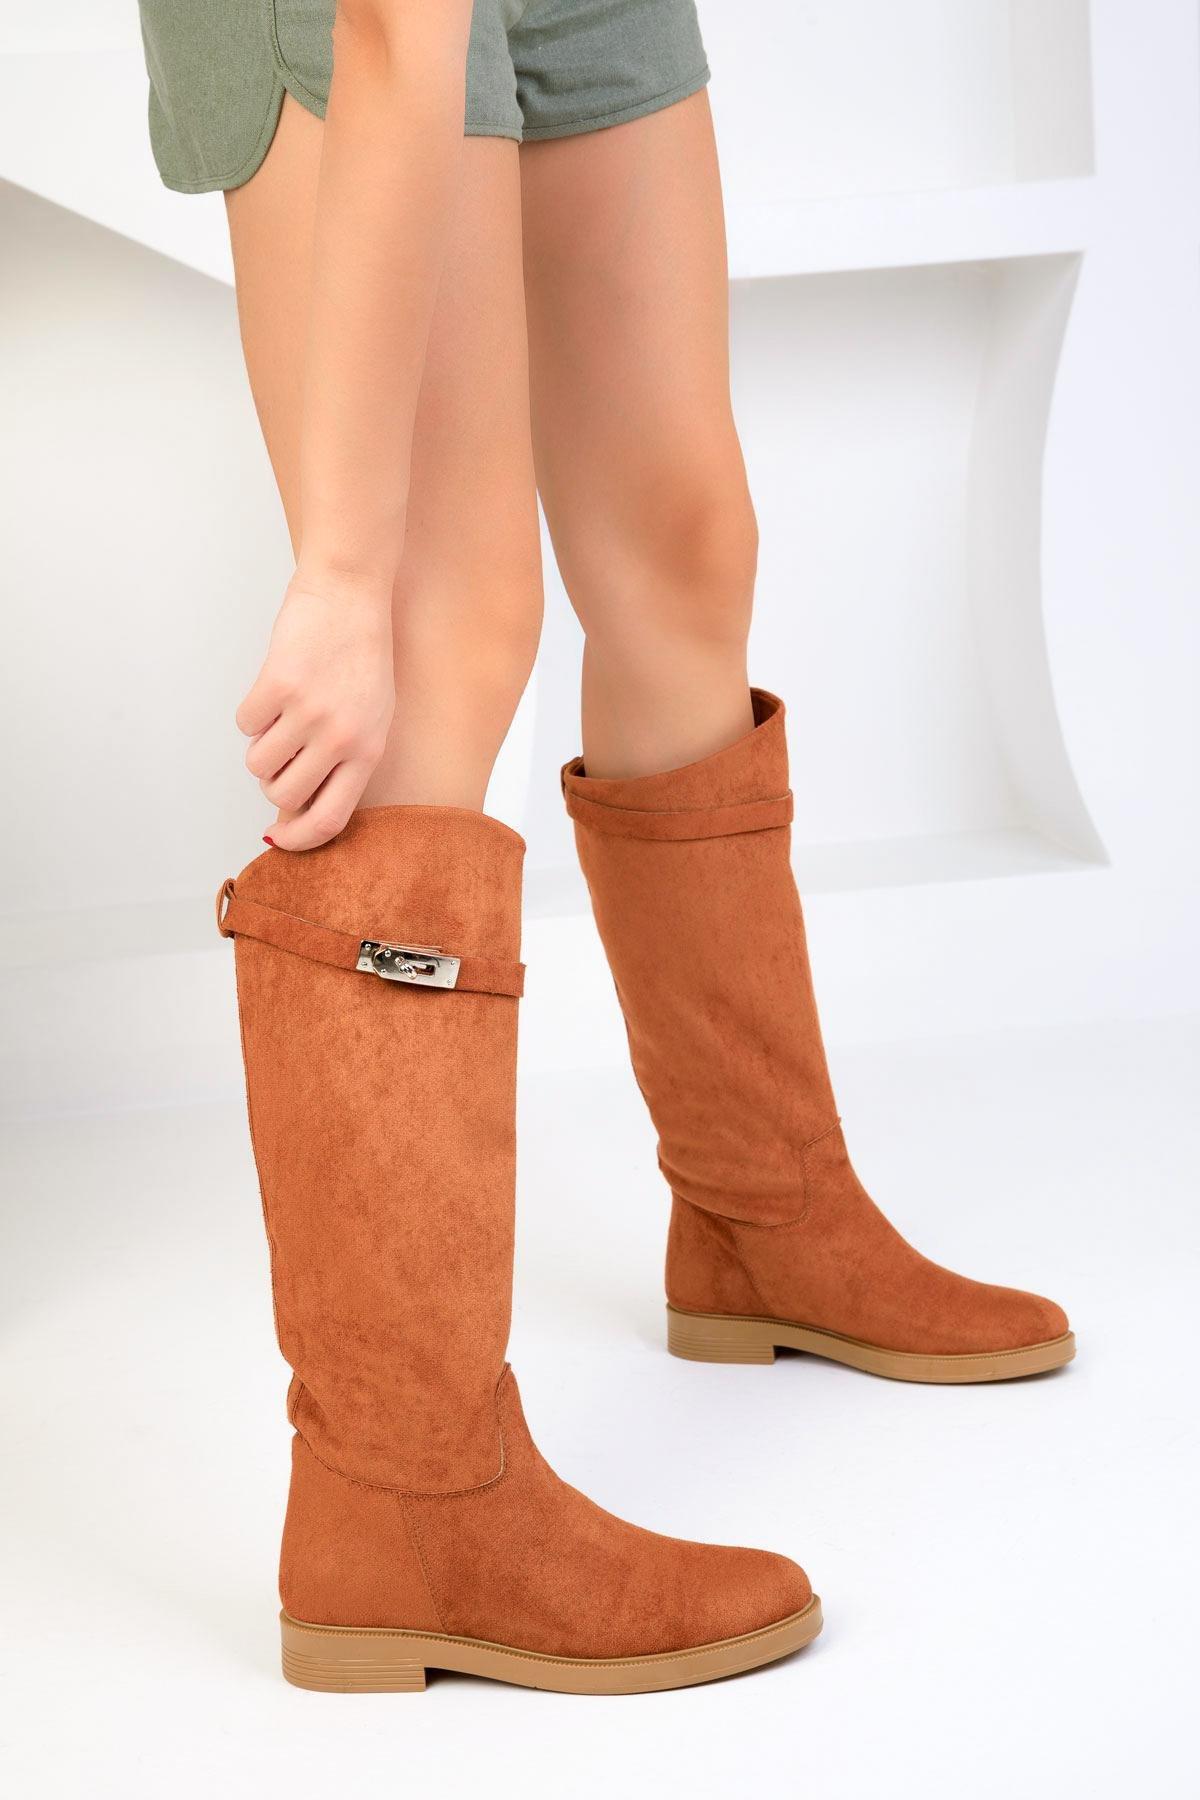 SOHO - brown Suede Knee High Flat Boots